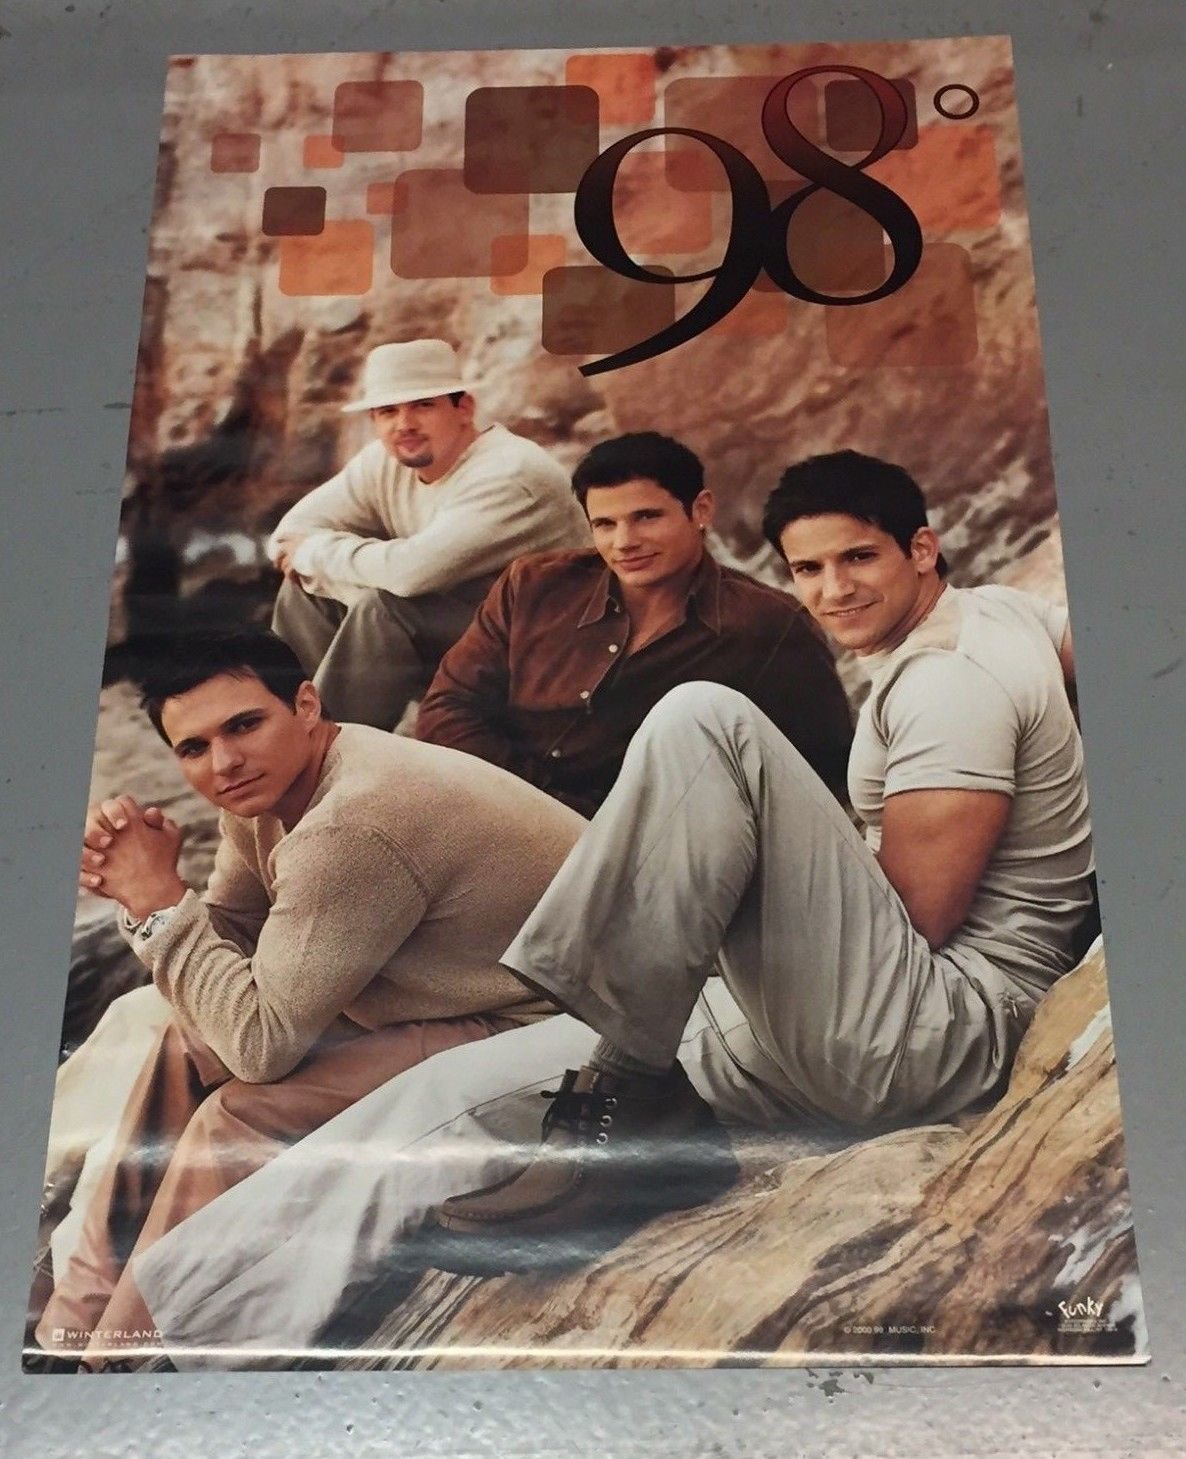 Vintage 98 DEGREES music group poster (22x34) never previously displayed  (2000)